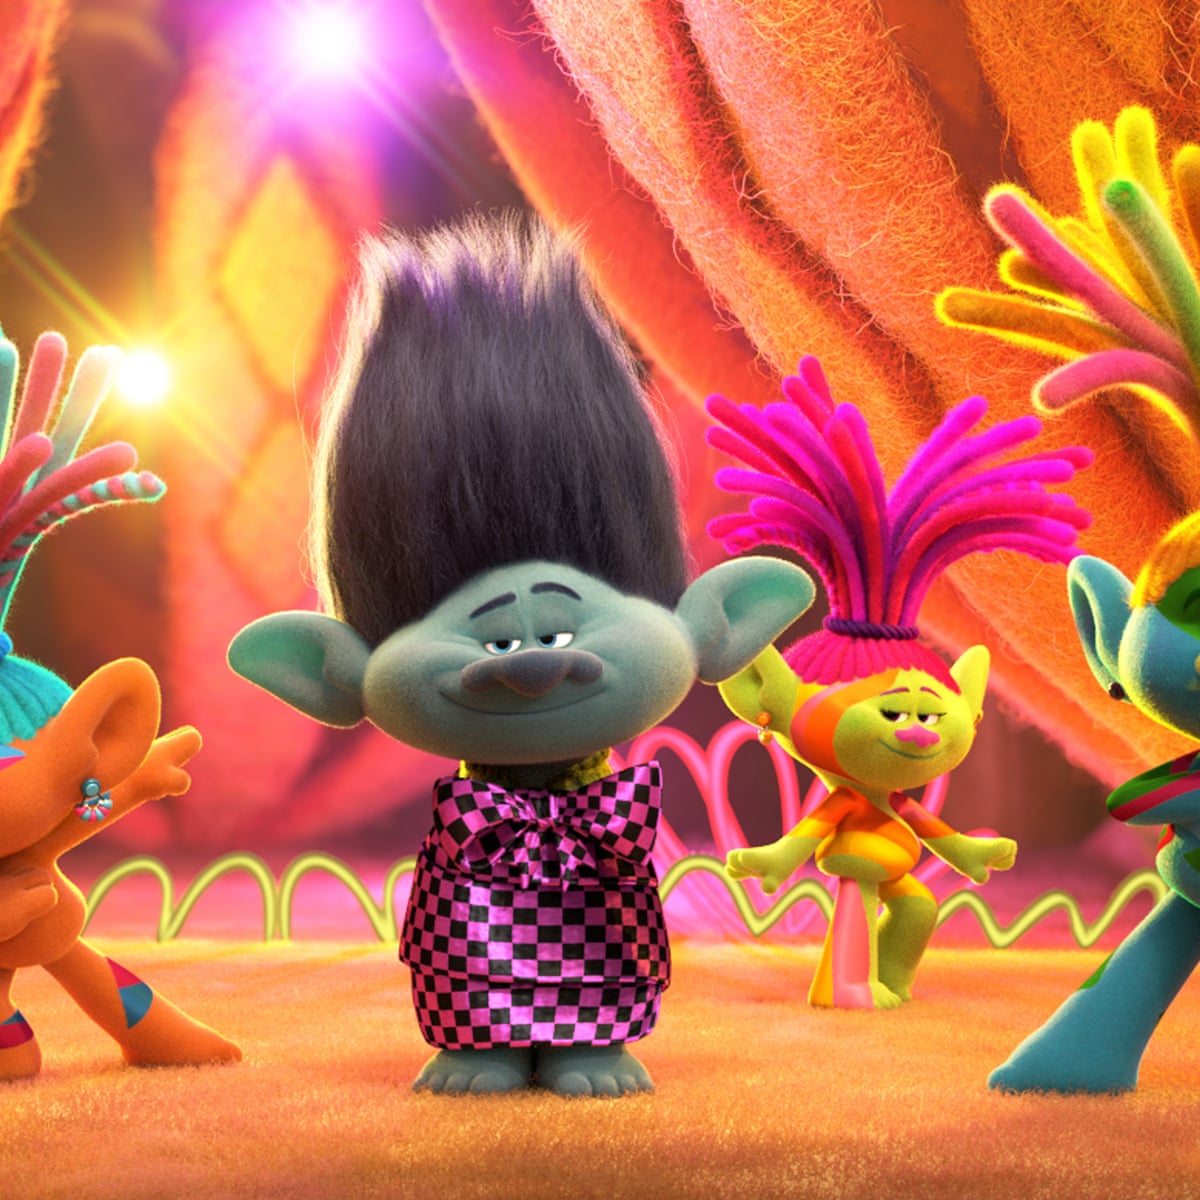 Trolls World Tour review – uplifting animated sequel | Movies | The Guardian